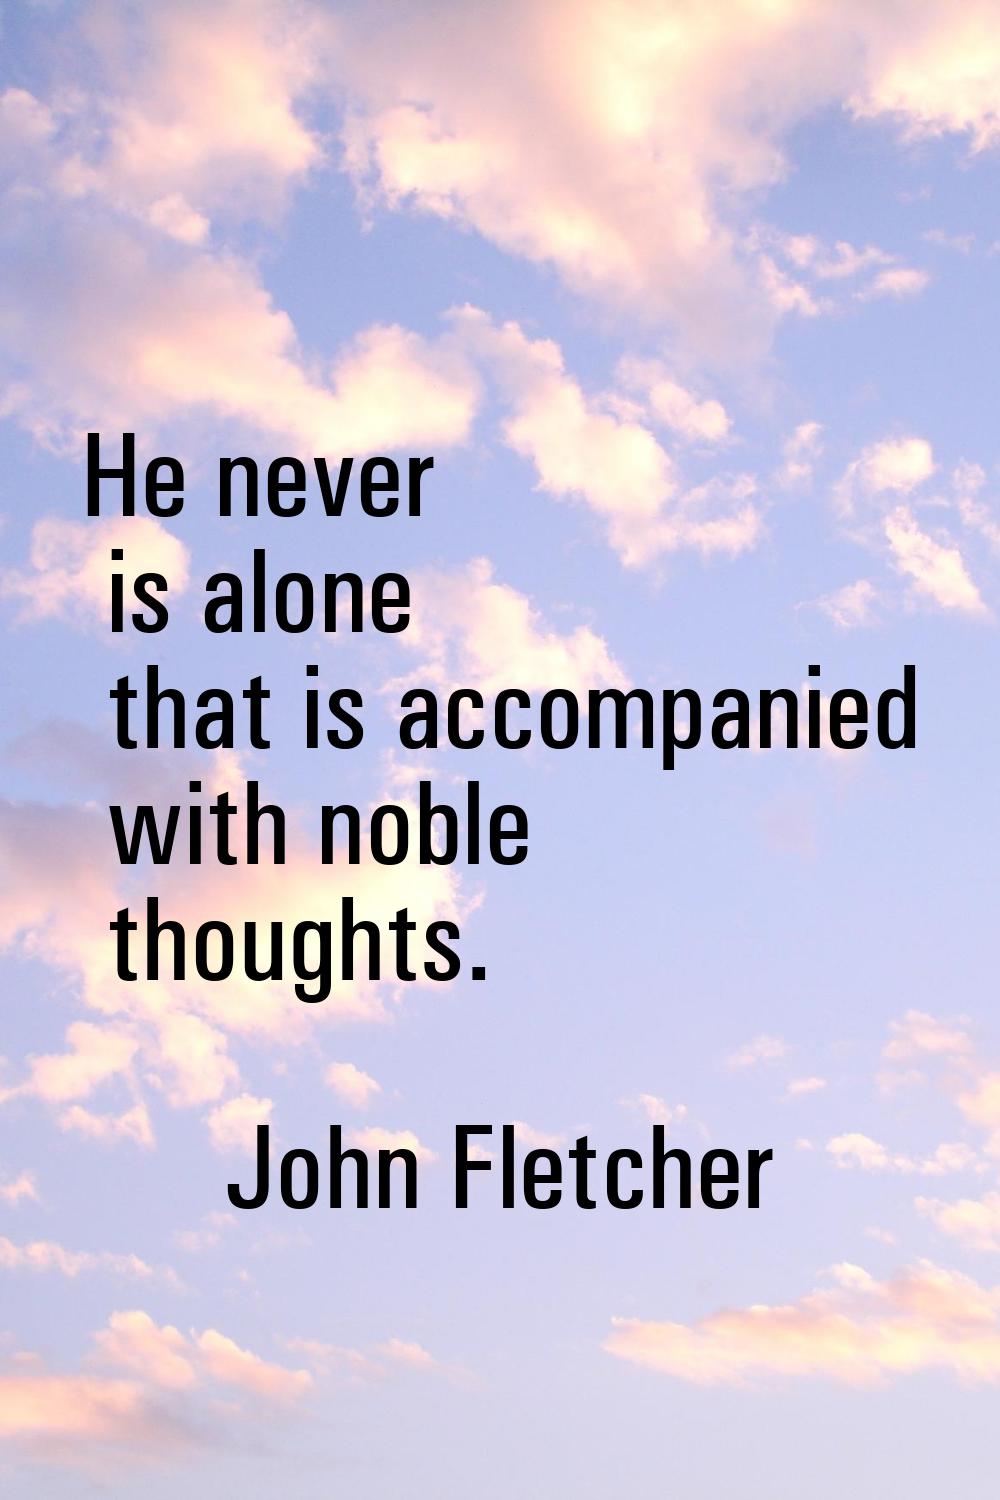 He never is alone that is accompanied with noble thoughts.